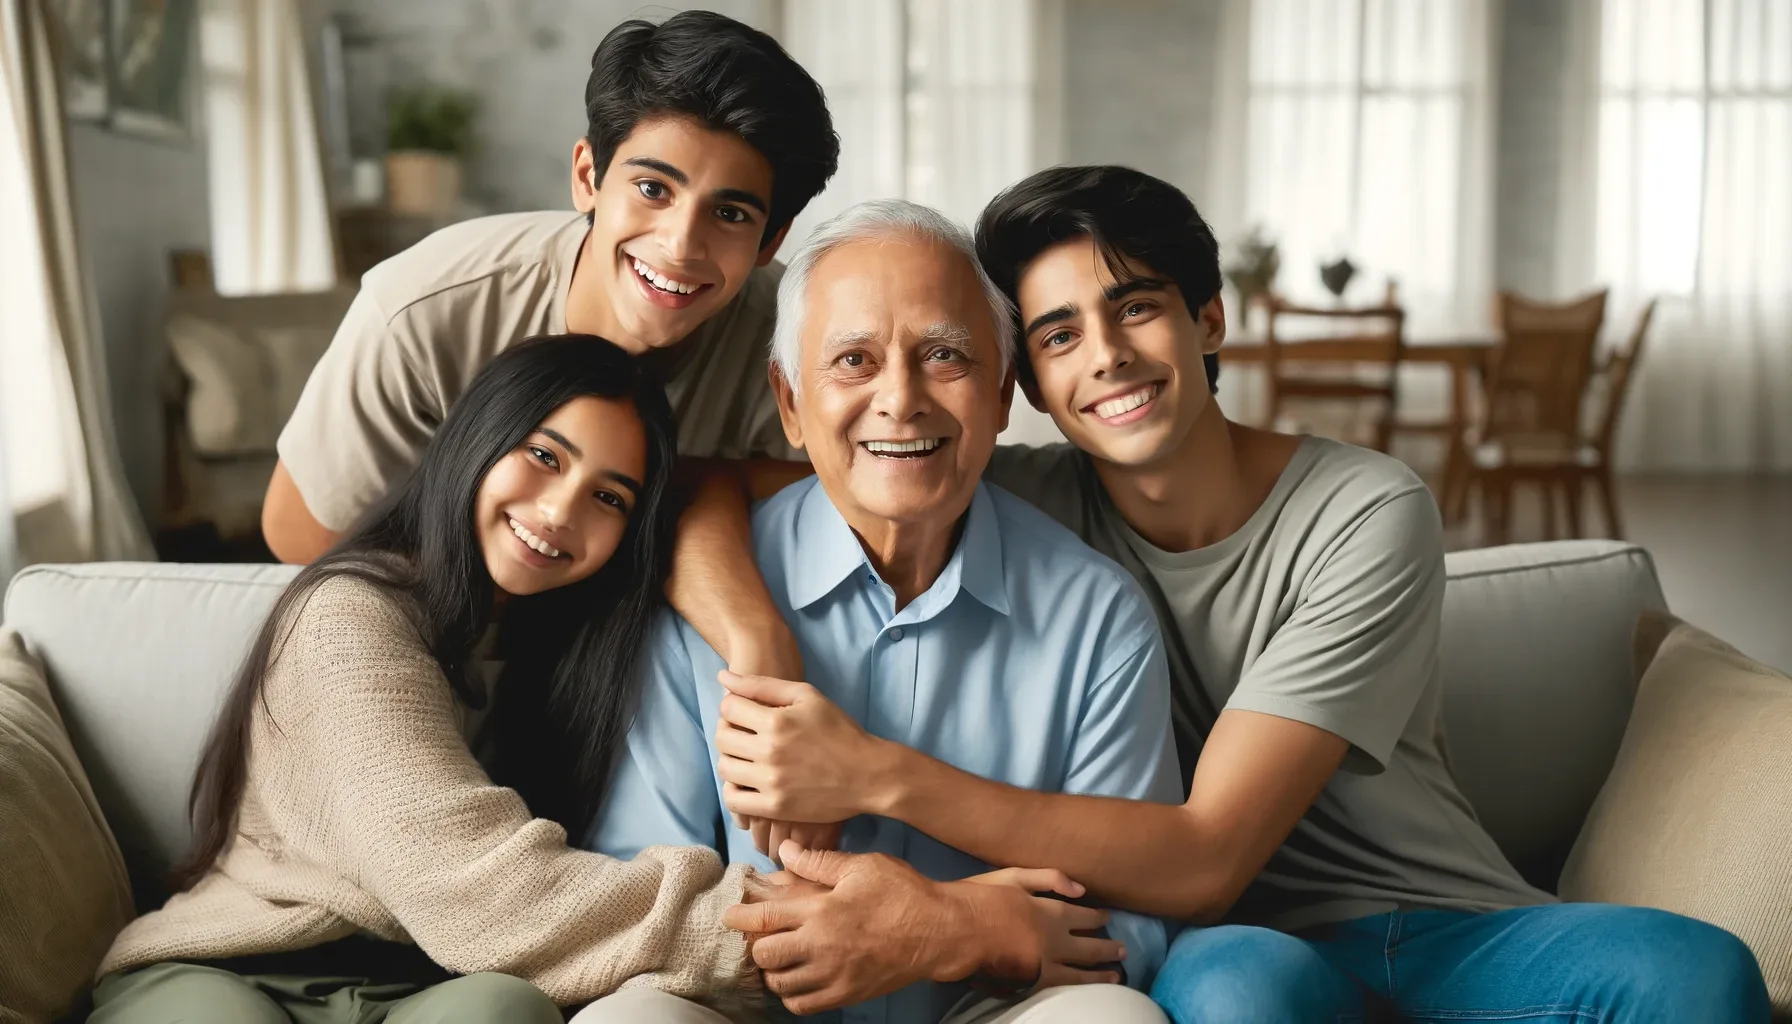 An image of a n older South Asian and his three grandkids.